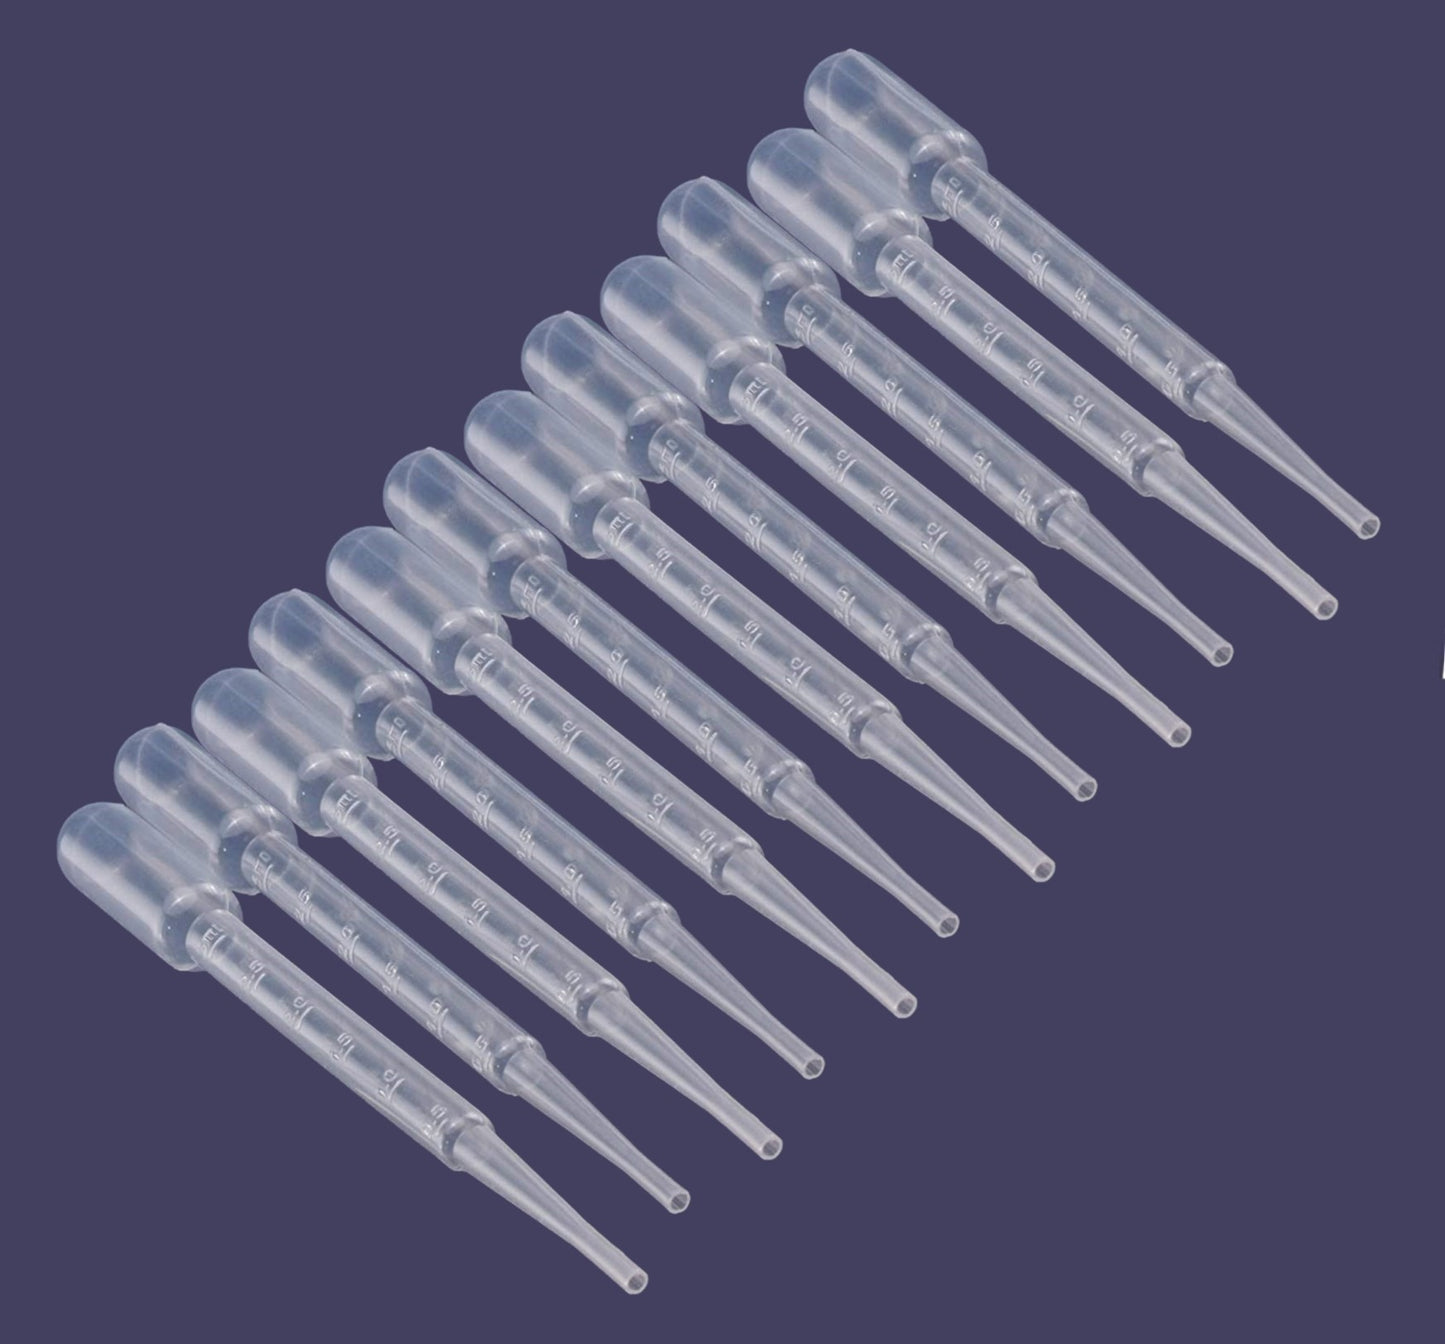 3 ml Disposable Transfer Pipettes with Graduations